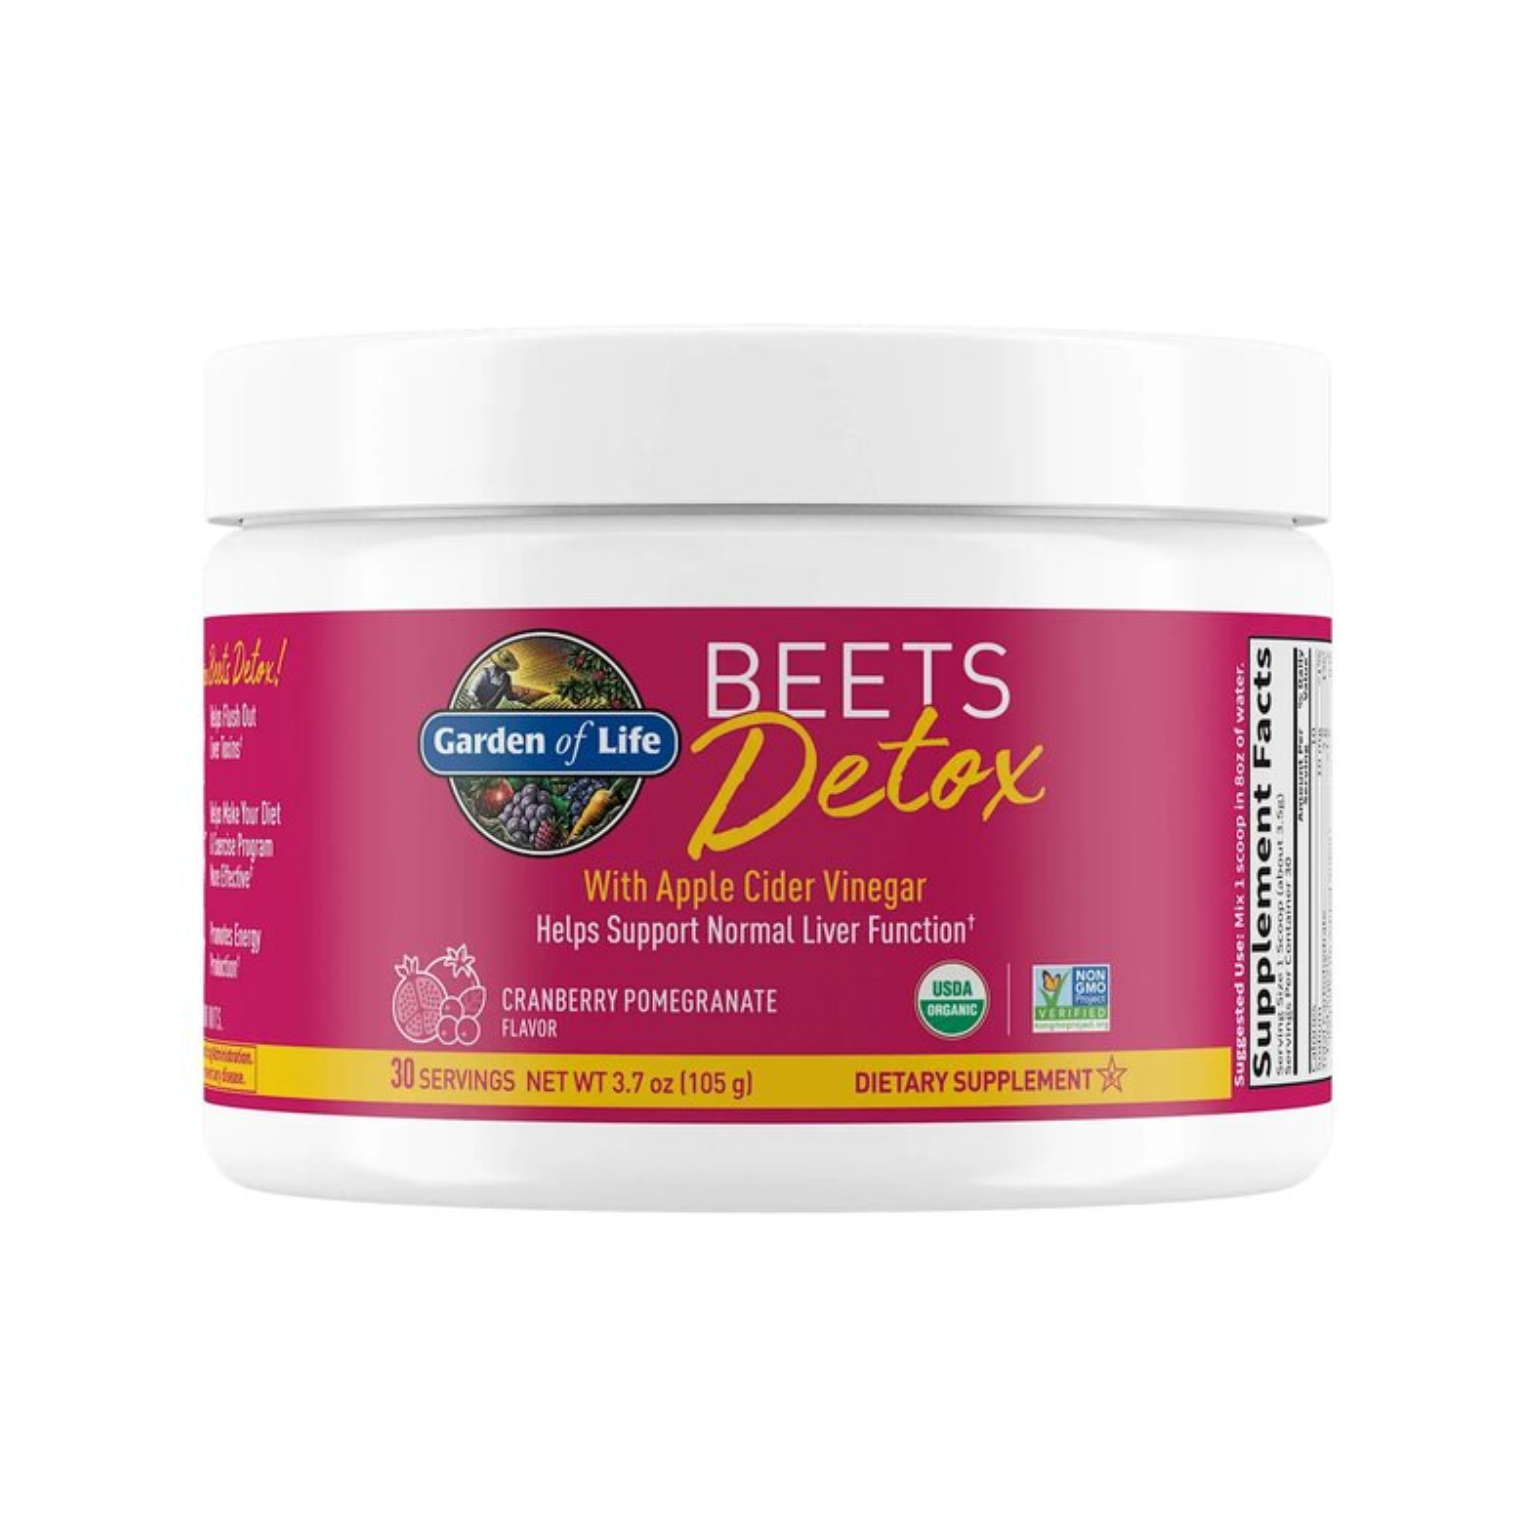 Detox Beets Powder (Cranberry Pomegranate) - 105 grams By Garden of Life